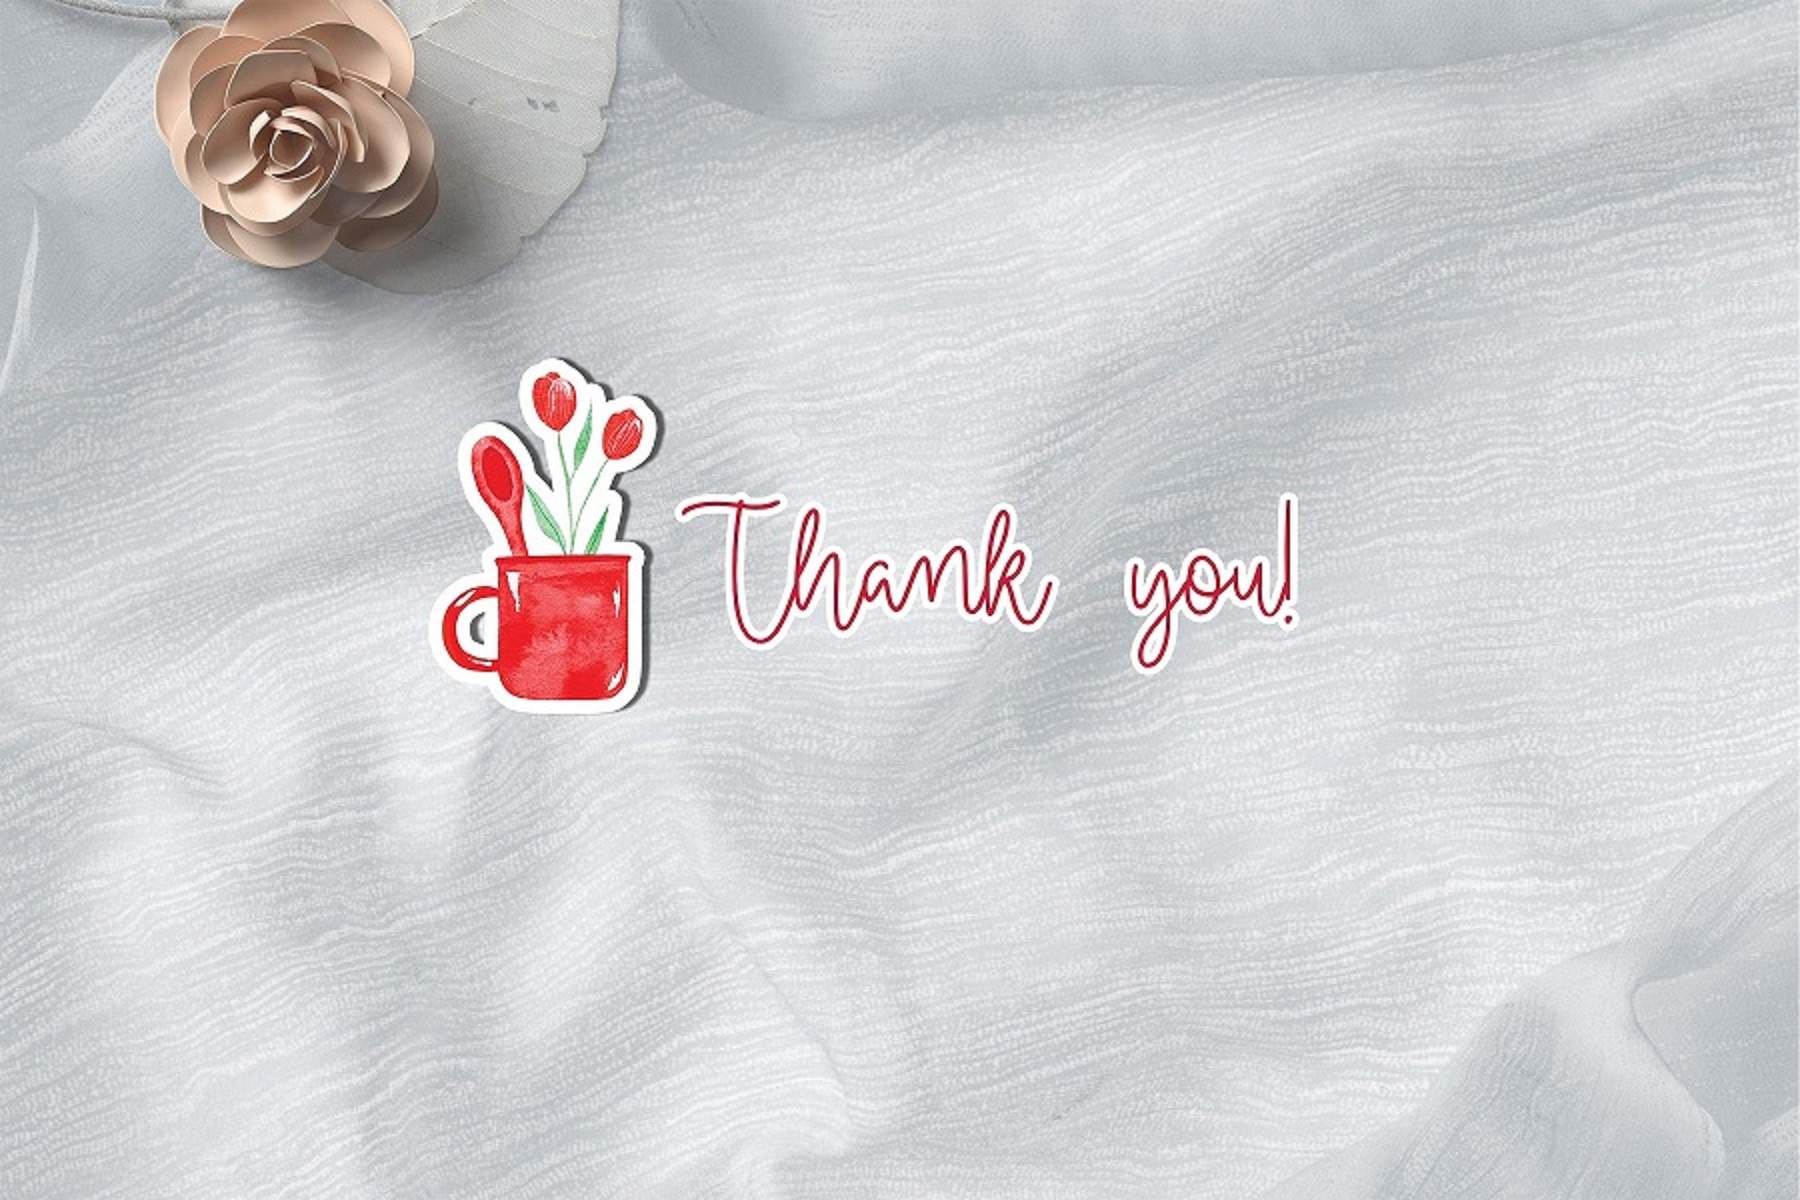 Thank you sticker with a coffee cup and flowers.